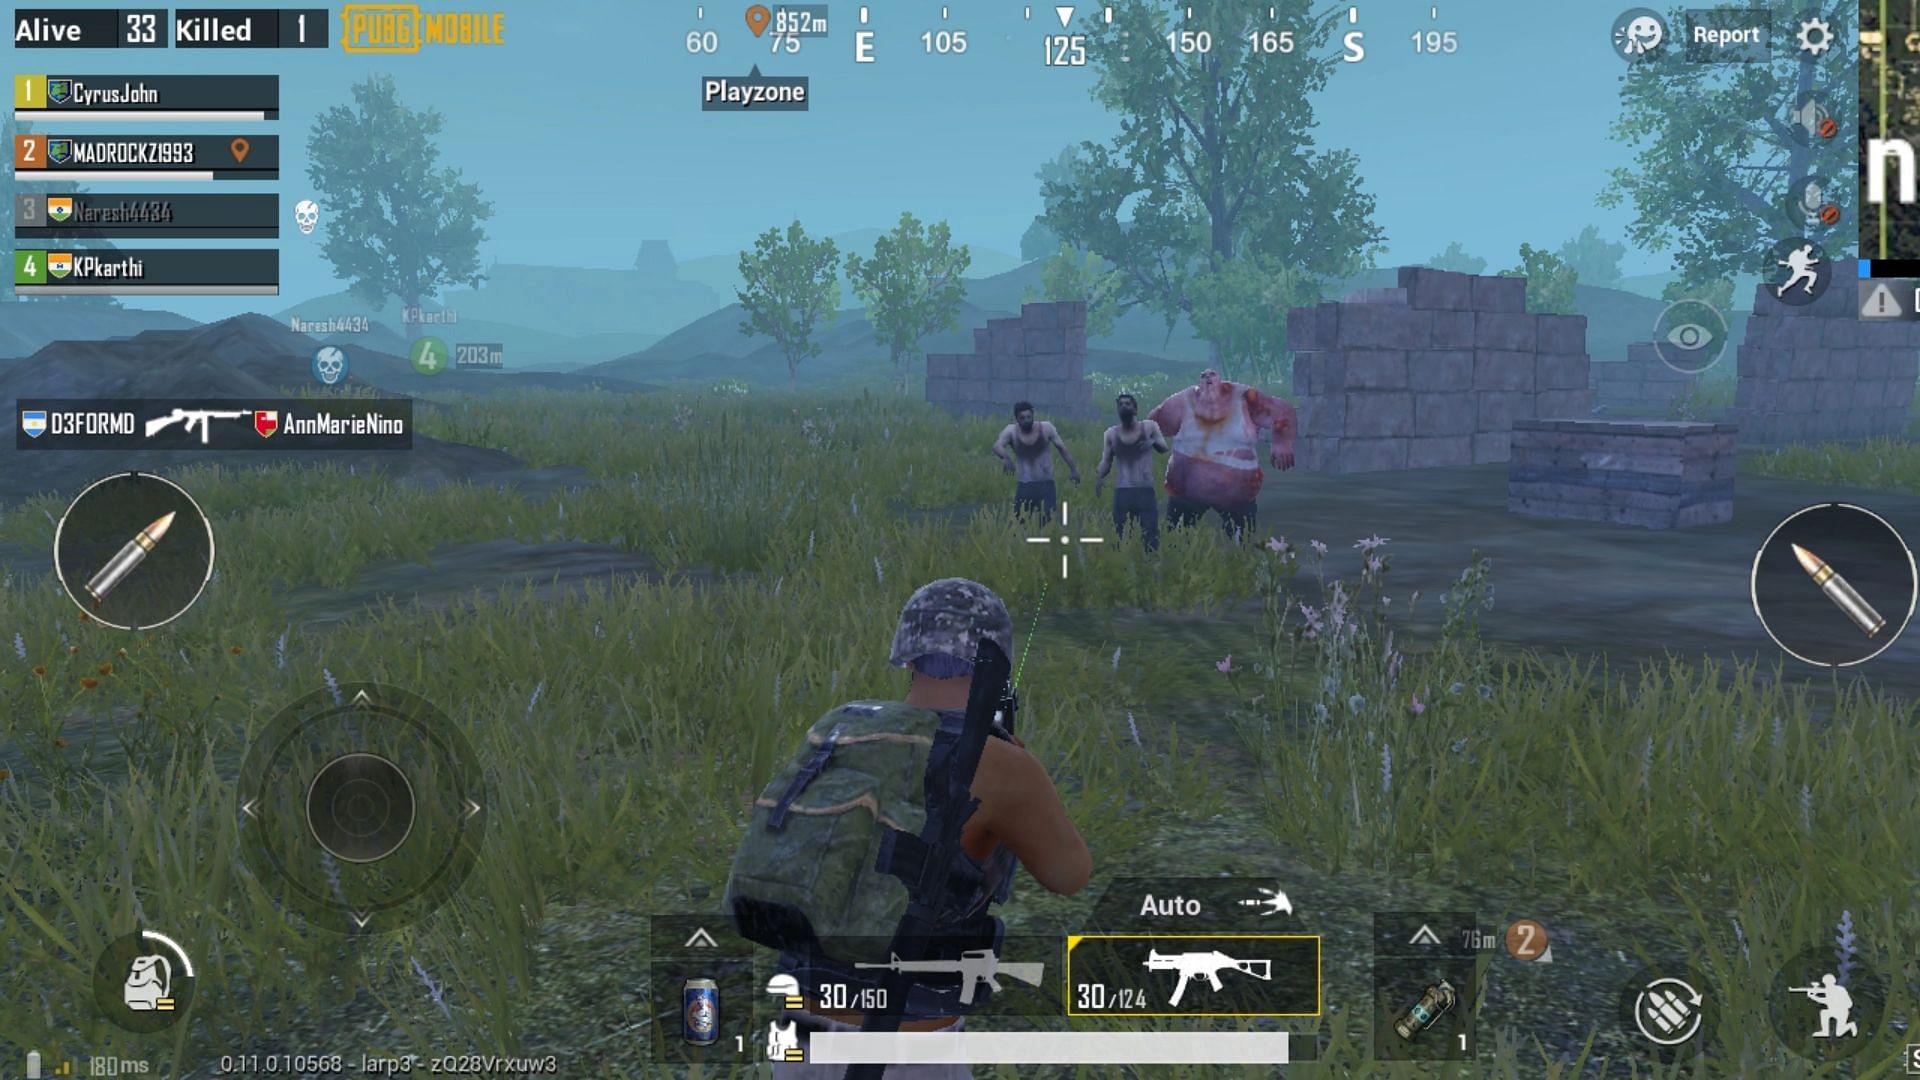 PUBG gameplay could become addictive, making players oblivious to their surroundings.